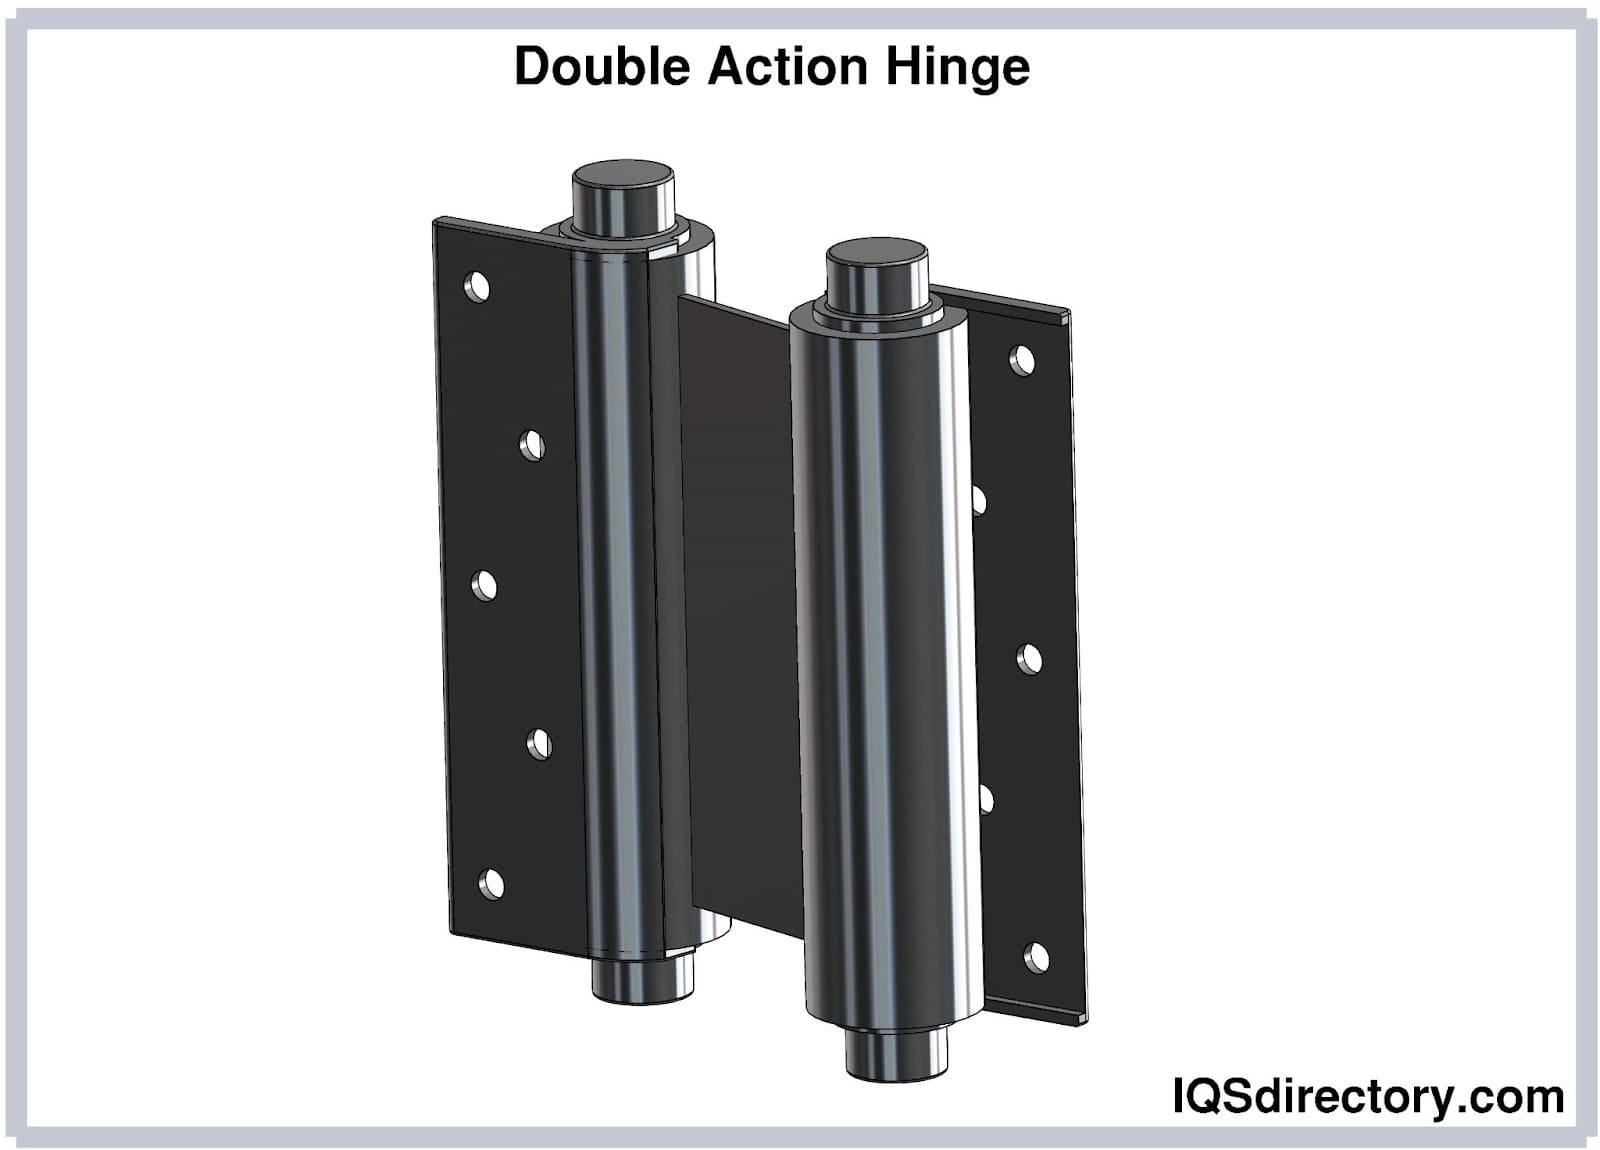 Double Action Hinge